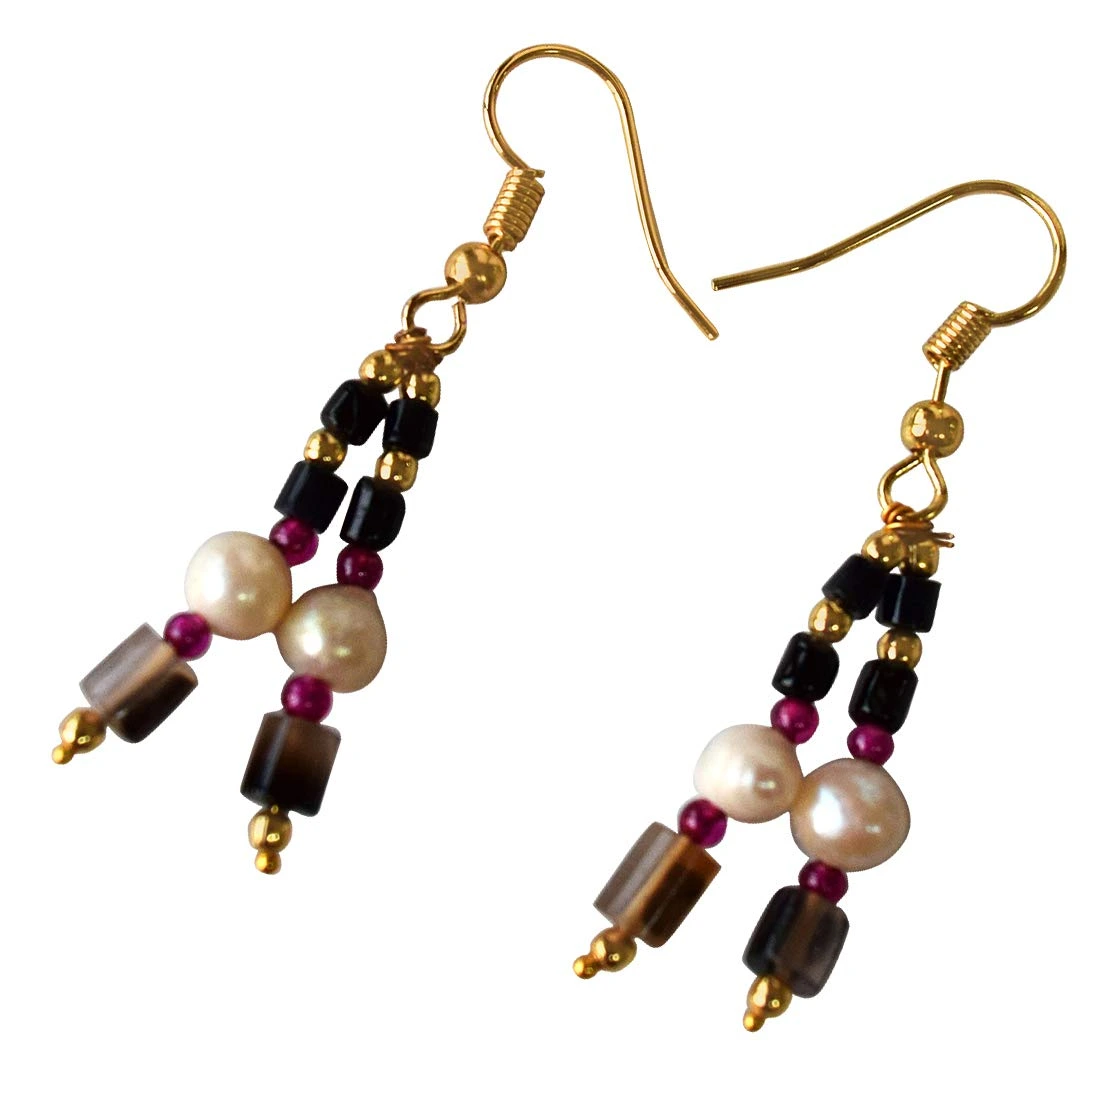 Black Onyx, Red Garnet, Gold Plated Beads and Freshwater Pearls Hanging Earrings for Women (SE339)